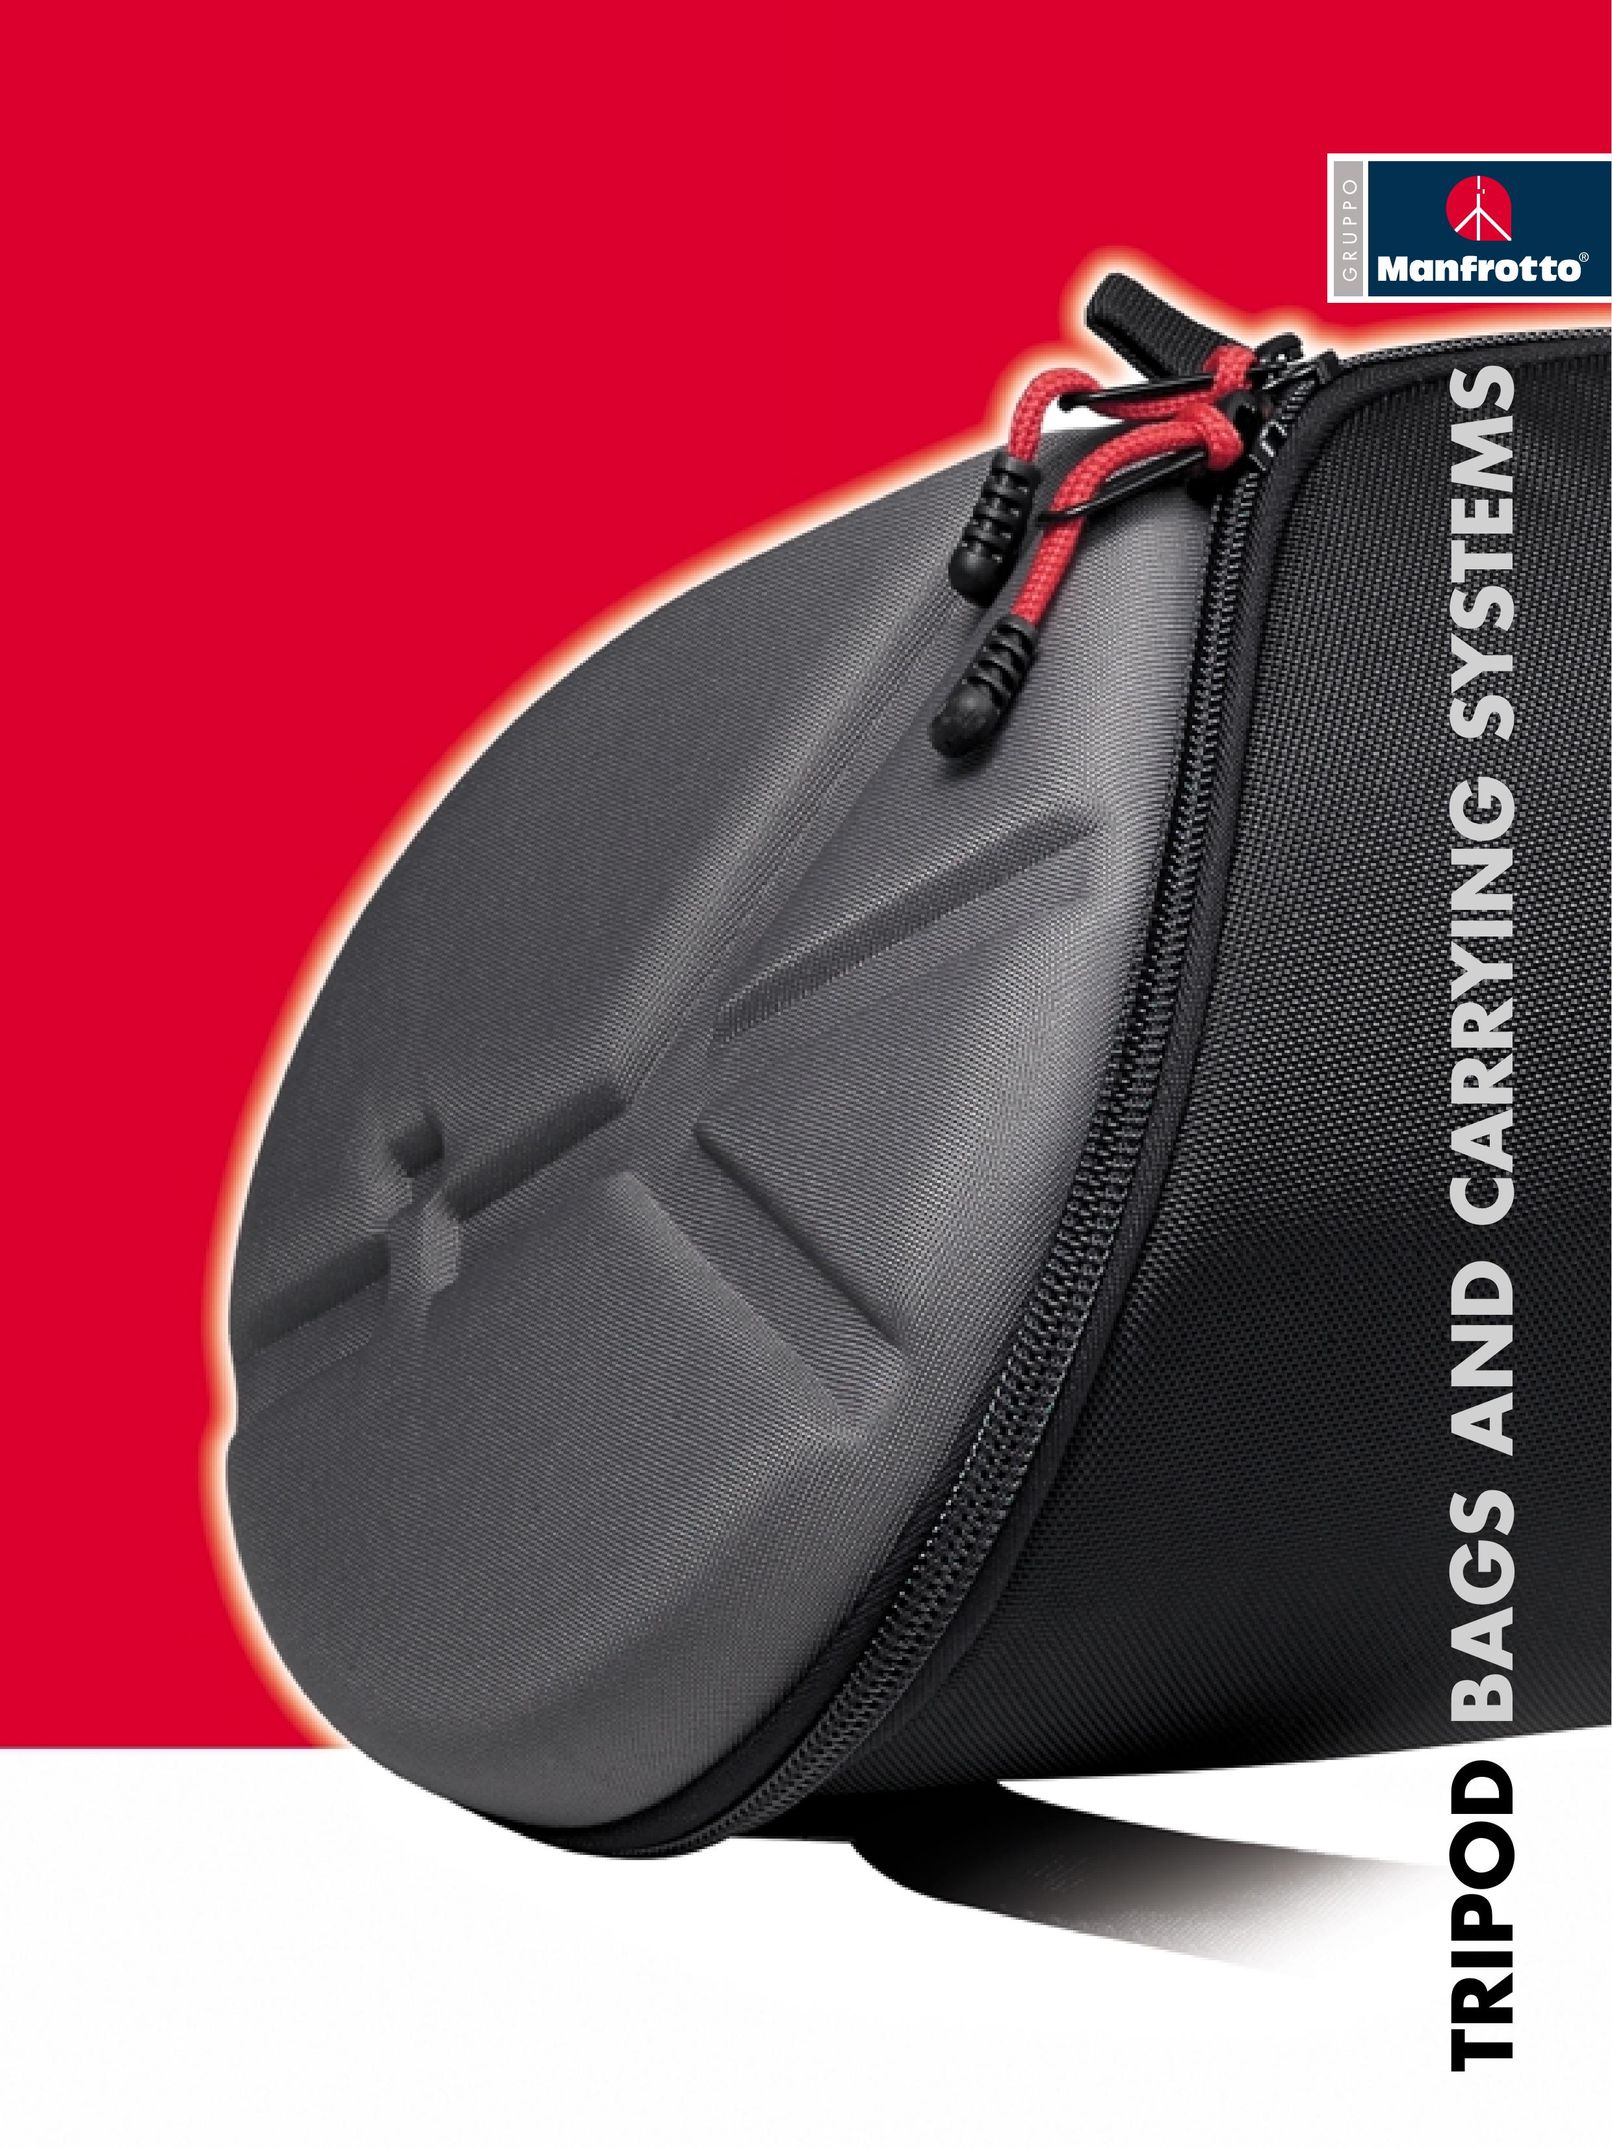 Manfrotto MBAGD Carrying Case User Manual